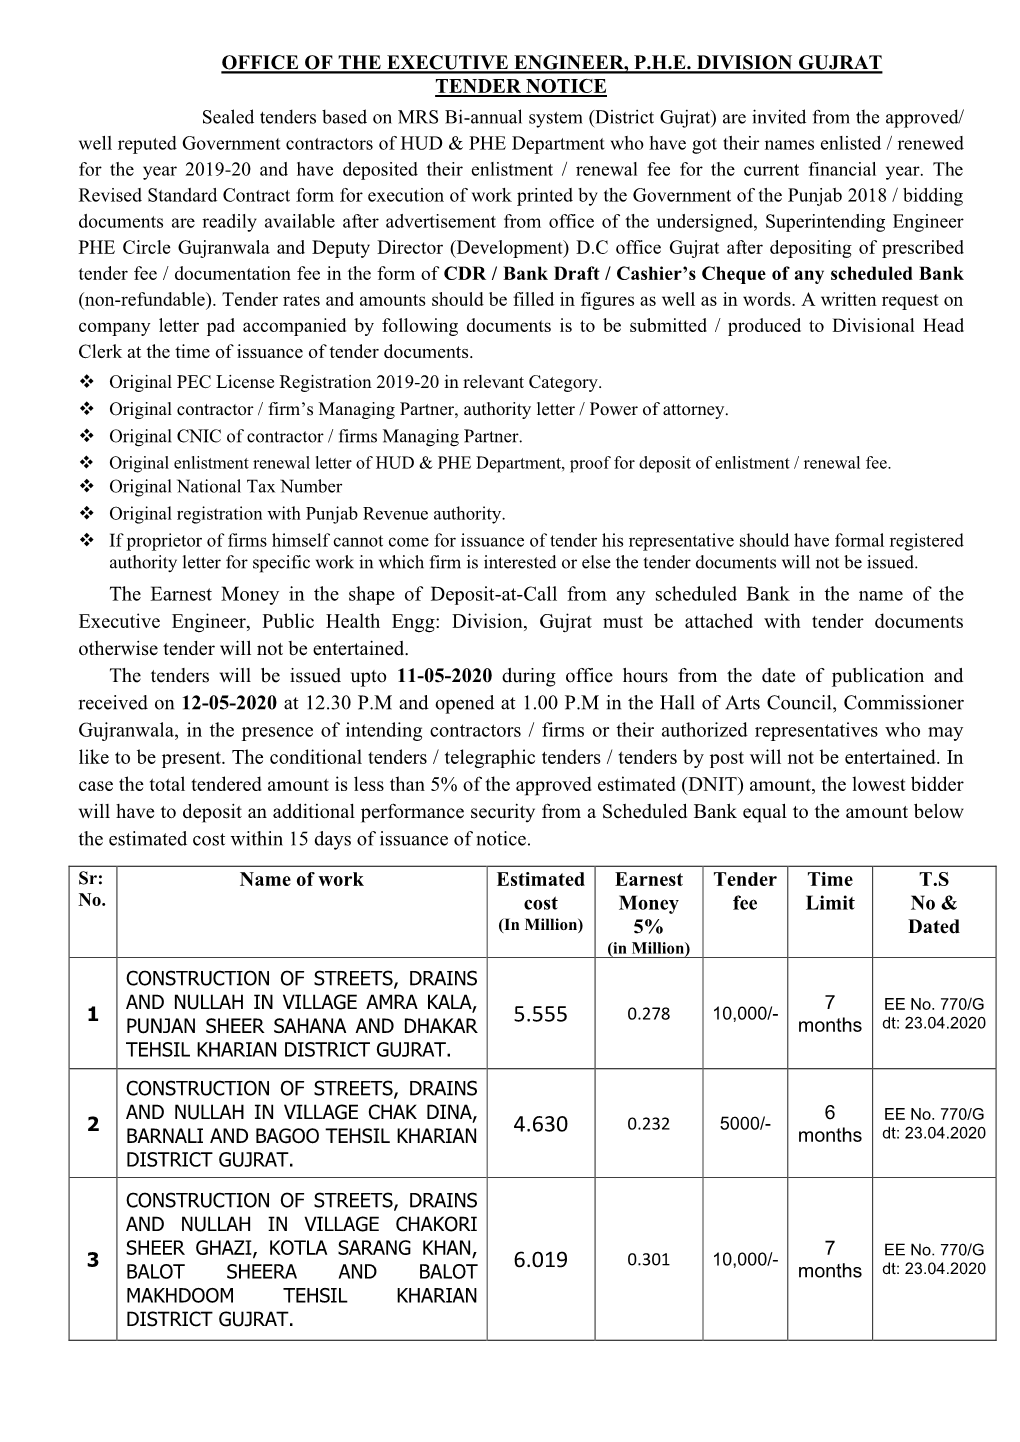 Office of the Executive Engineer, P.H.E. Division Gujrat Tender Notice